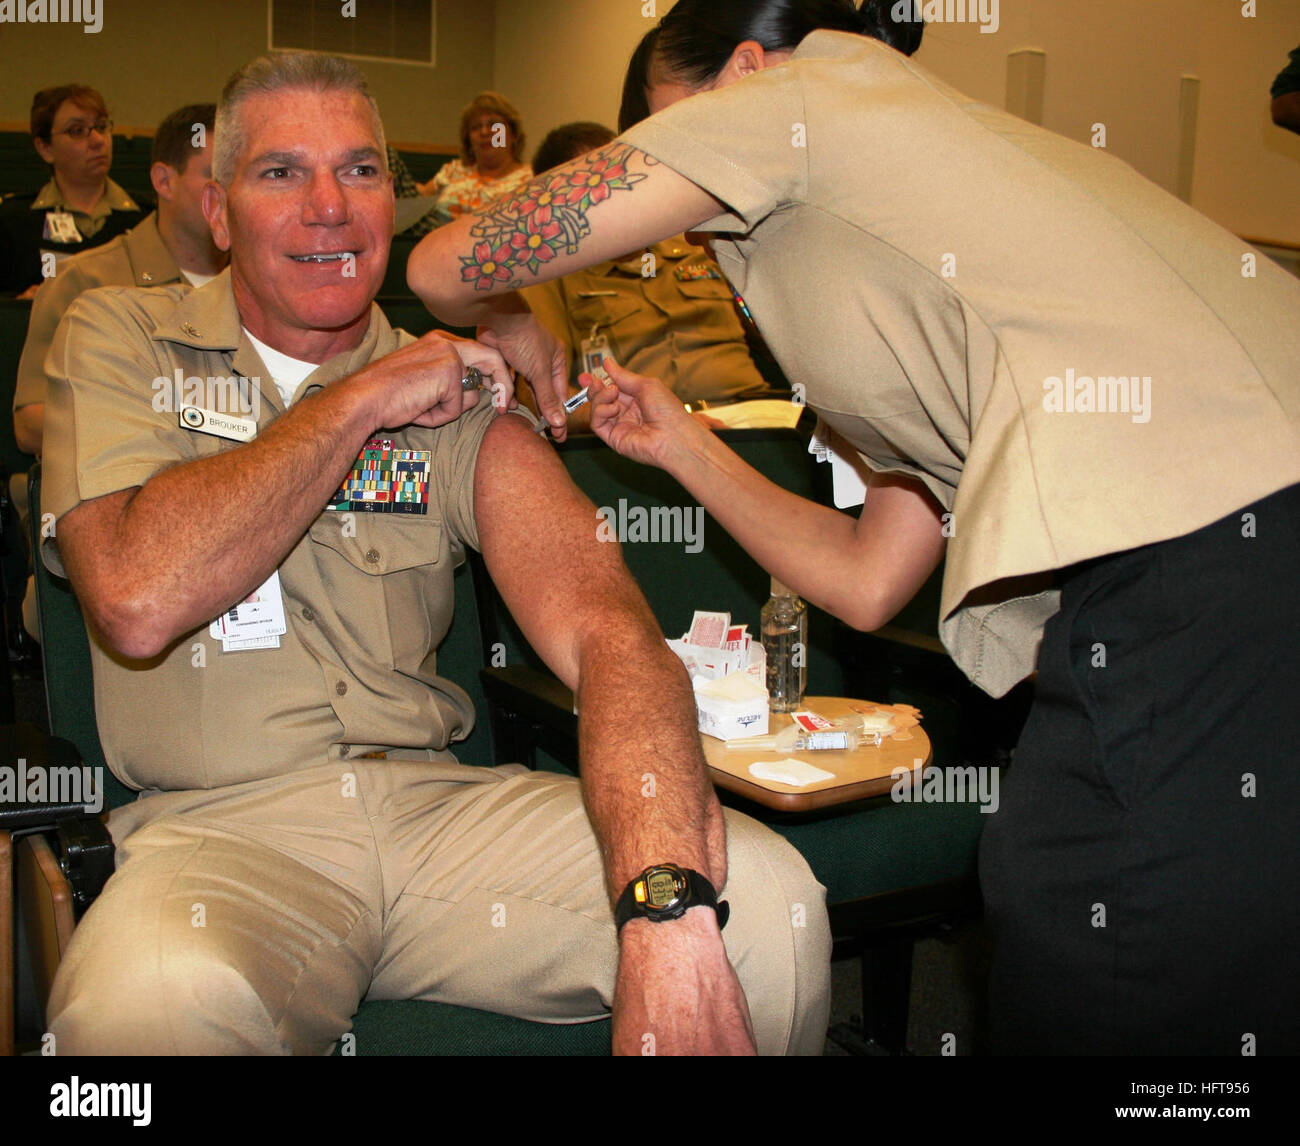 100913-N-8191S-001 BREMERTON, Wash. (Sept. 13, 2010) Capt. Mark E. Brouker, commanding officer of Naval Hospital Bremerton, is vaccinated for influenza during SHOTEX 2010, a mass vaccination exercise for active duty and reserve component shore-based service members and critical civilian personnel.  Naval Hospital Bremerton and Naval Base Kitsap joined local tenant commands to complete the mass vaccination in 48 hours. (U.S. Navy photo by Douglas H. Stutz/Released) US Navy 100913-N-8191S-001 Capt. Mark E. Brouker, commanding officer of Naval Hospital Bremerton, is vaccinated for influenza Stock Photo